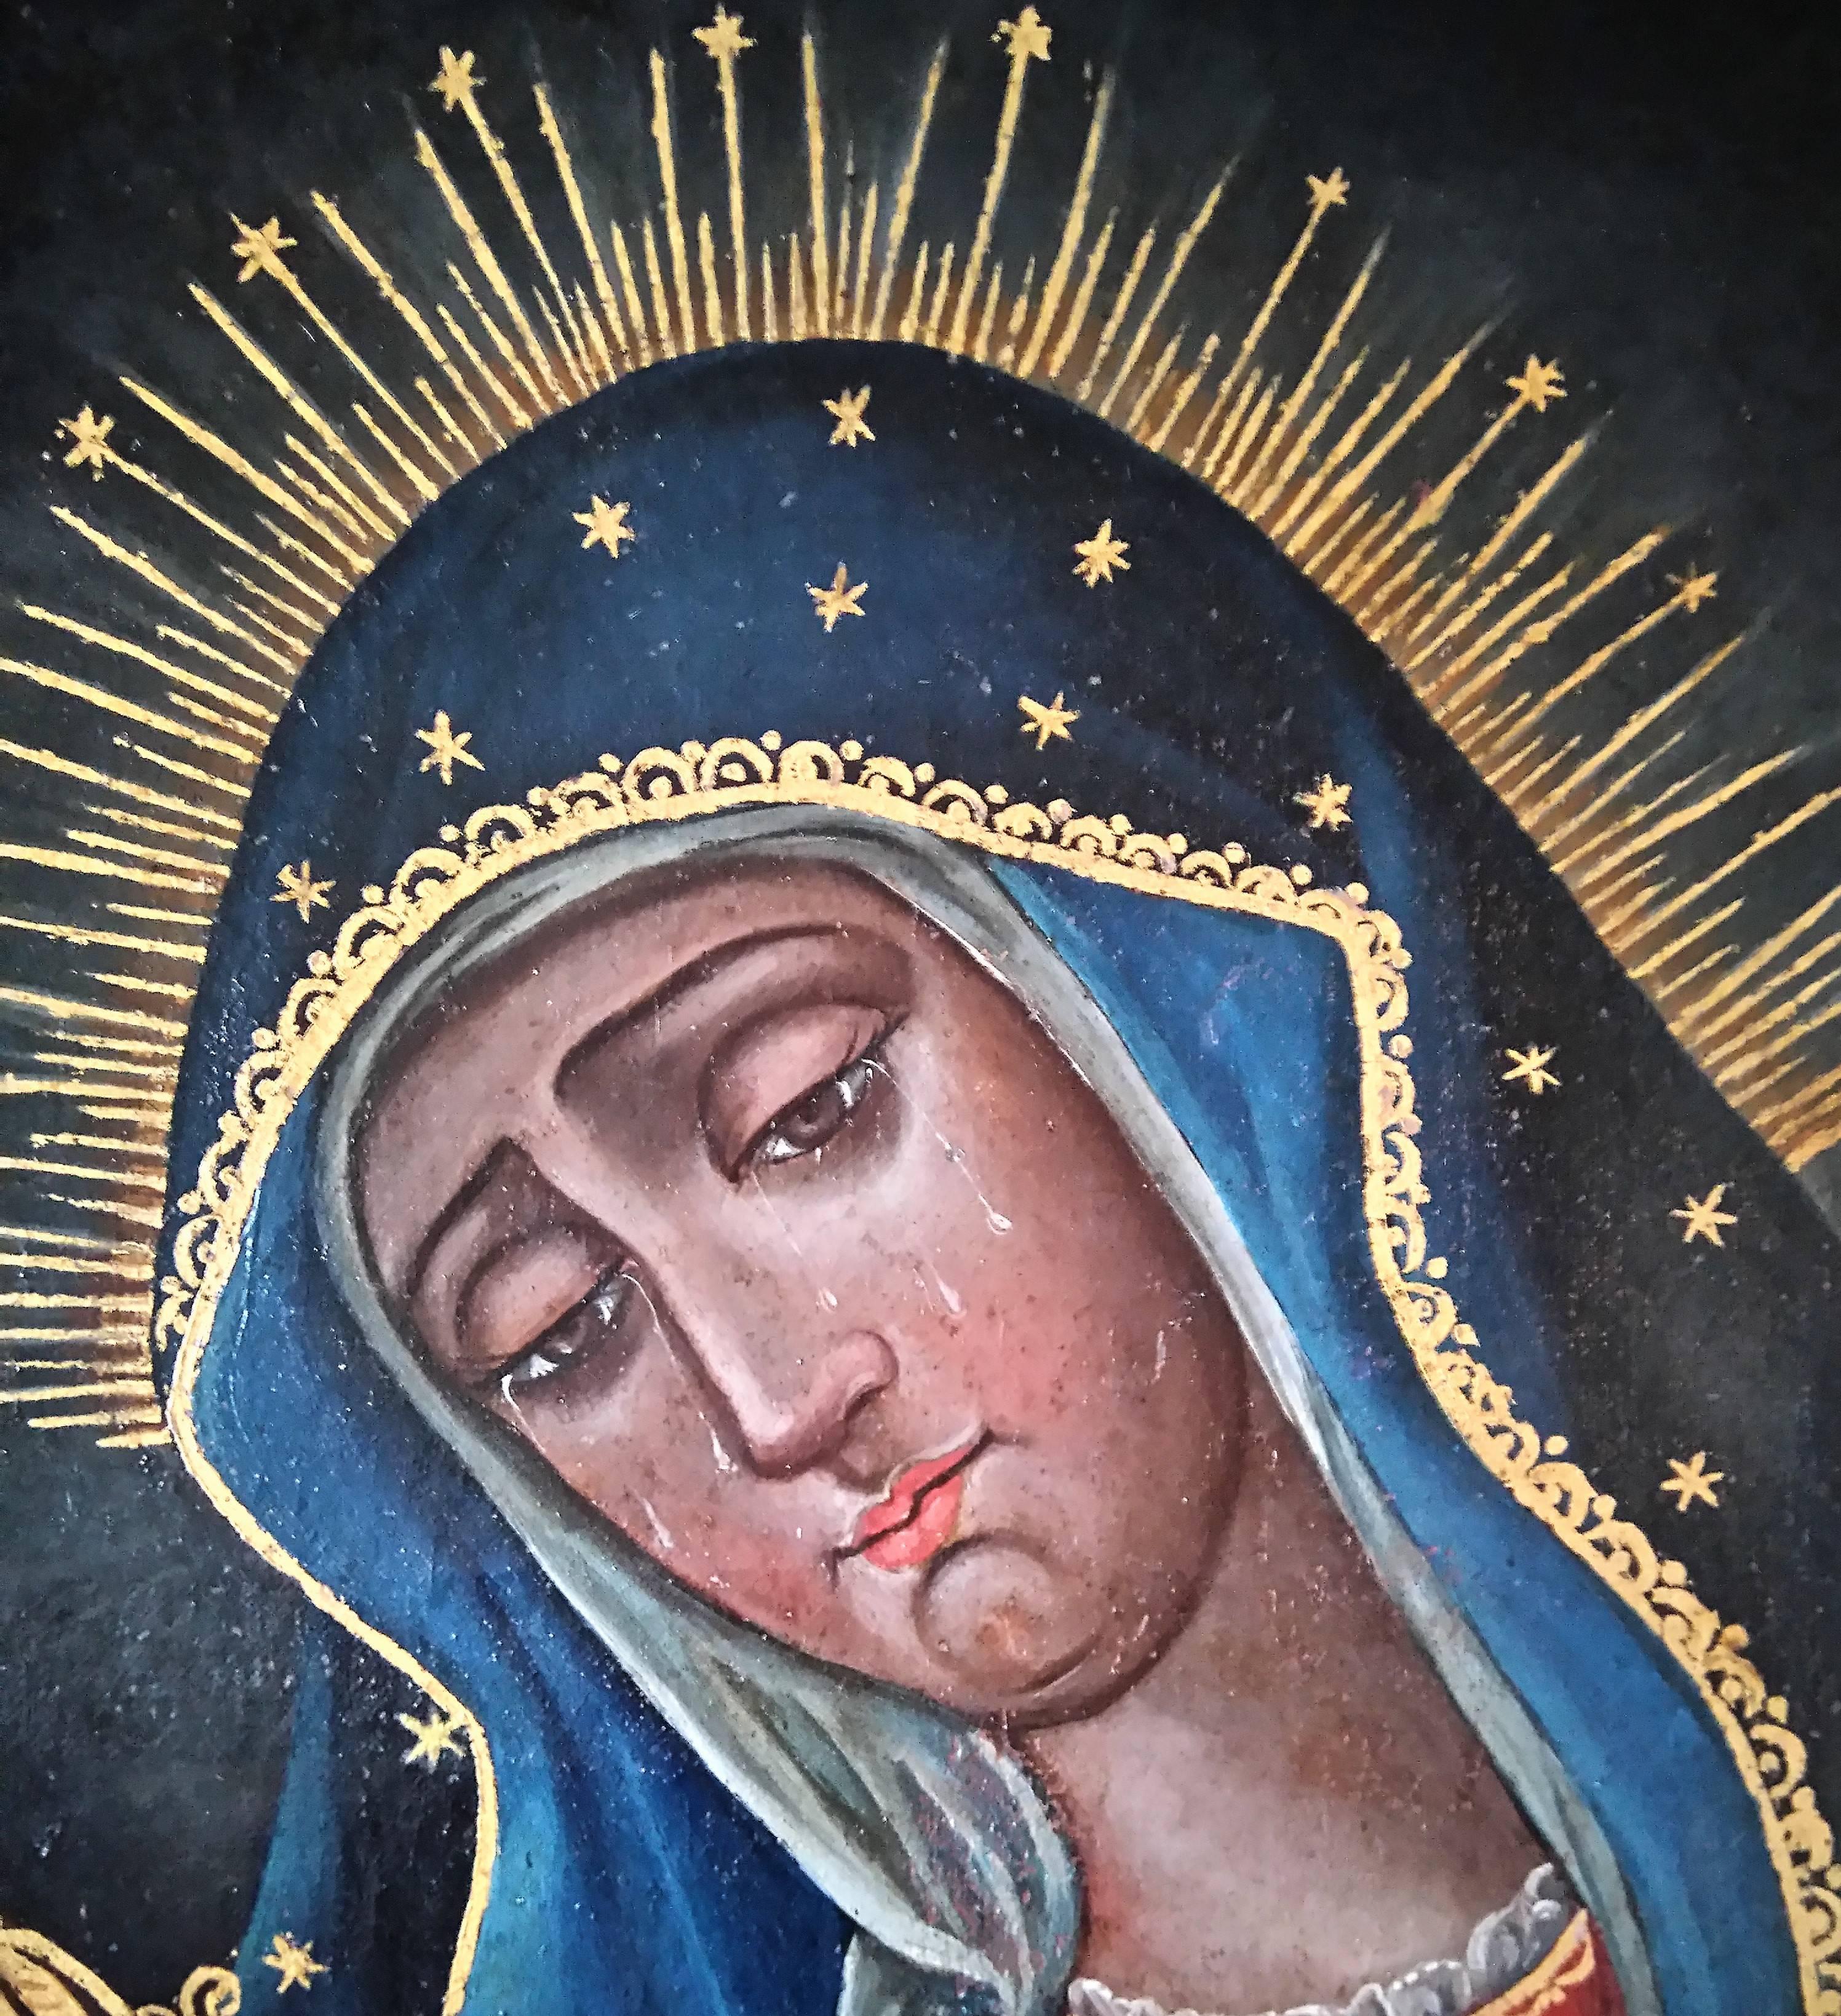 Our Lady of Sorrows (Latin: Matter Dolorosa), Spanish American oil on canvas painting of the Madonna. 19th century religious folk art painting of the Virgin Mary which was most likely painted in California.

 Our Lady of Sorrows (Latin: Matter